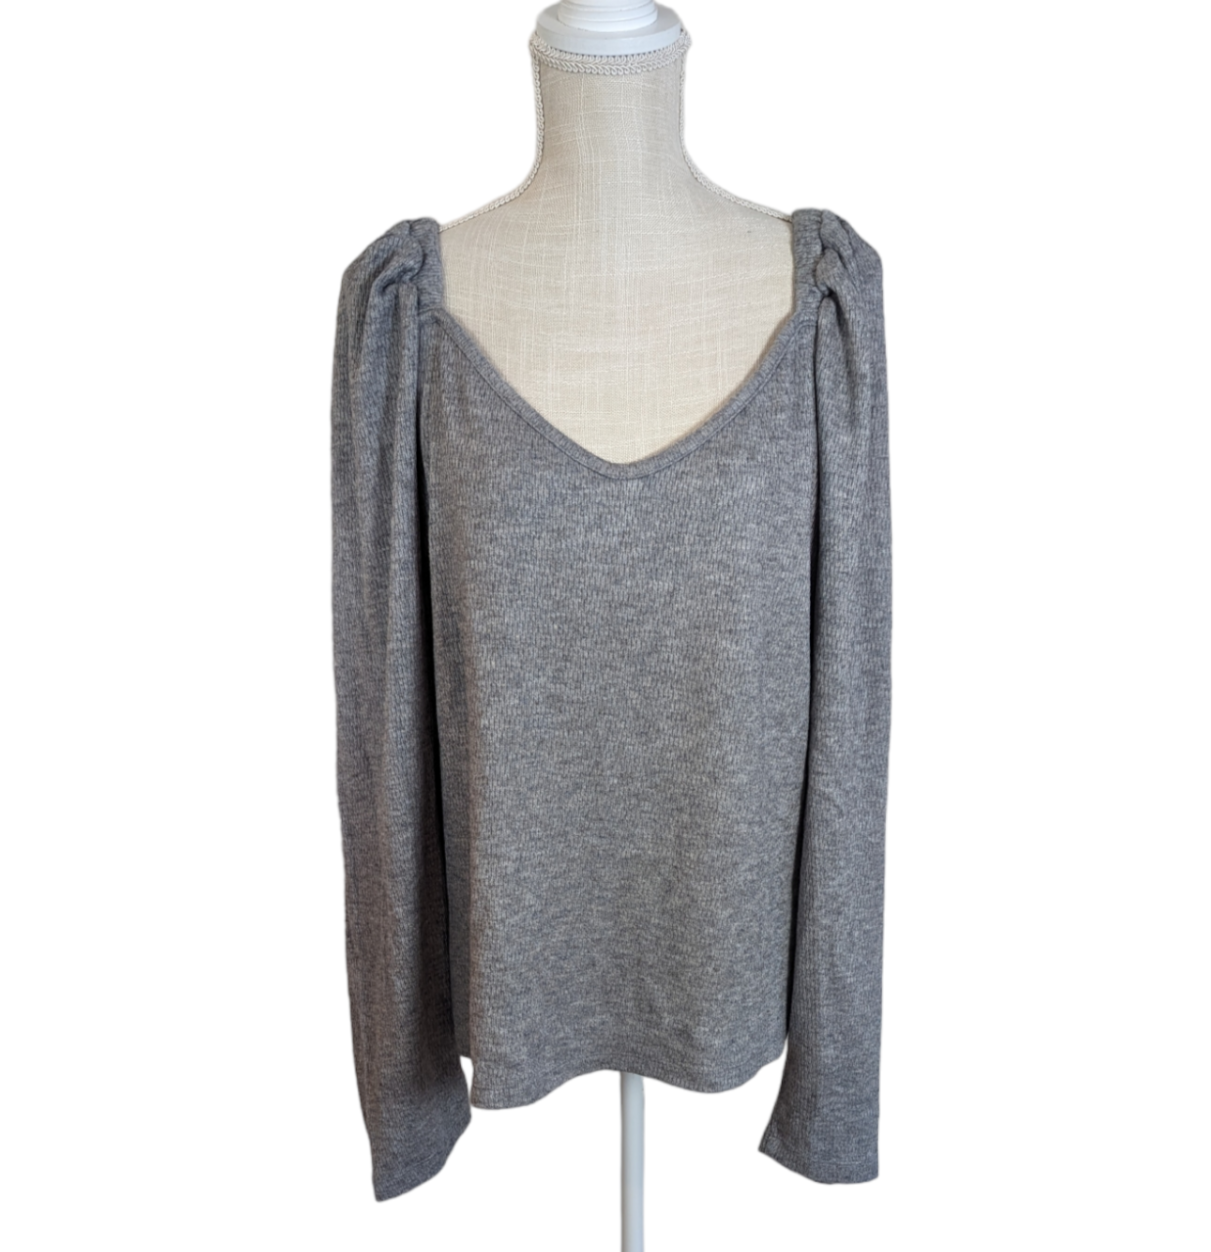 Primary image for a.n.a Women's Gray Textured Knit Sweetheart Neck Long Sleeve Top SZ 2X